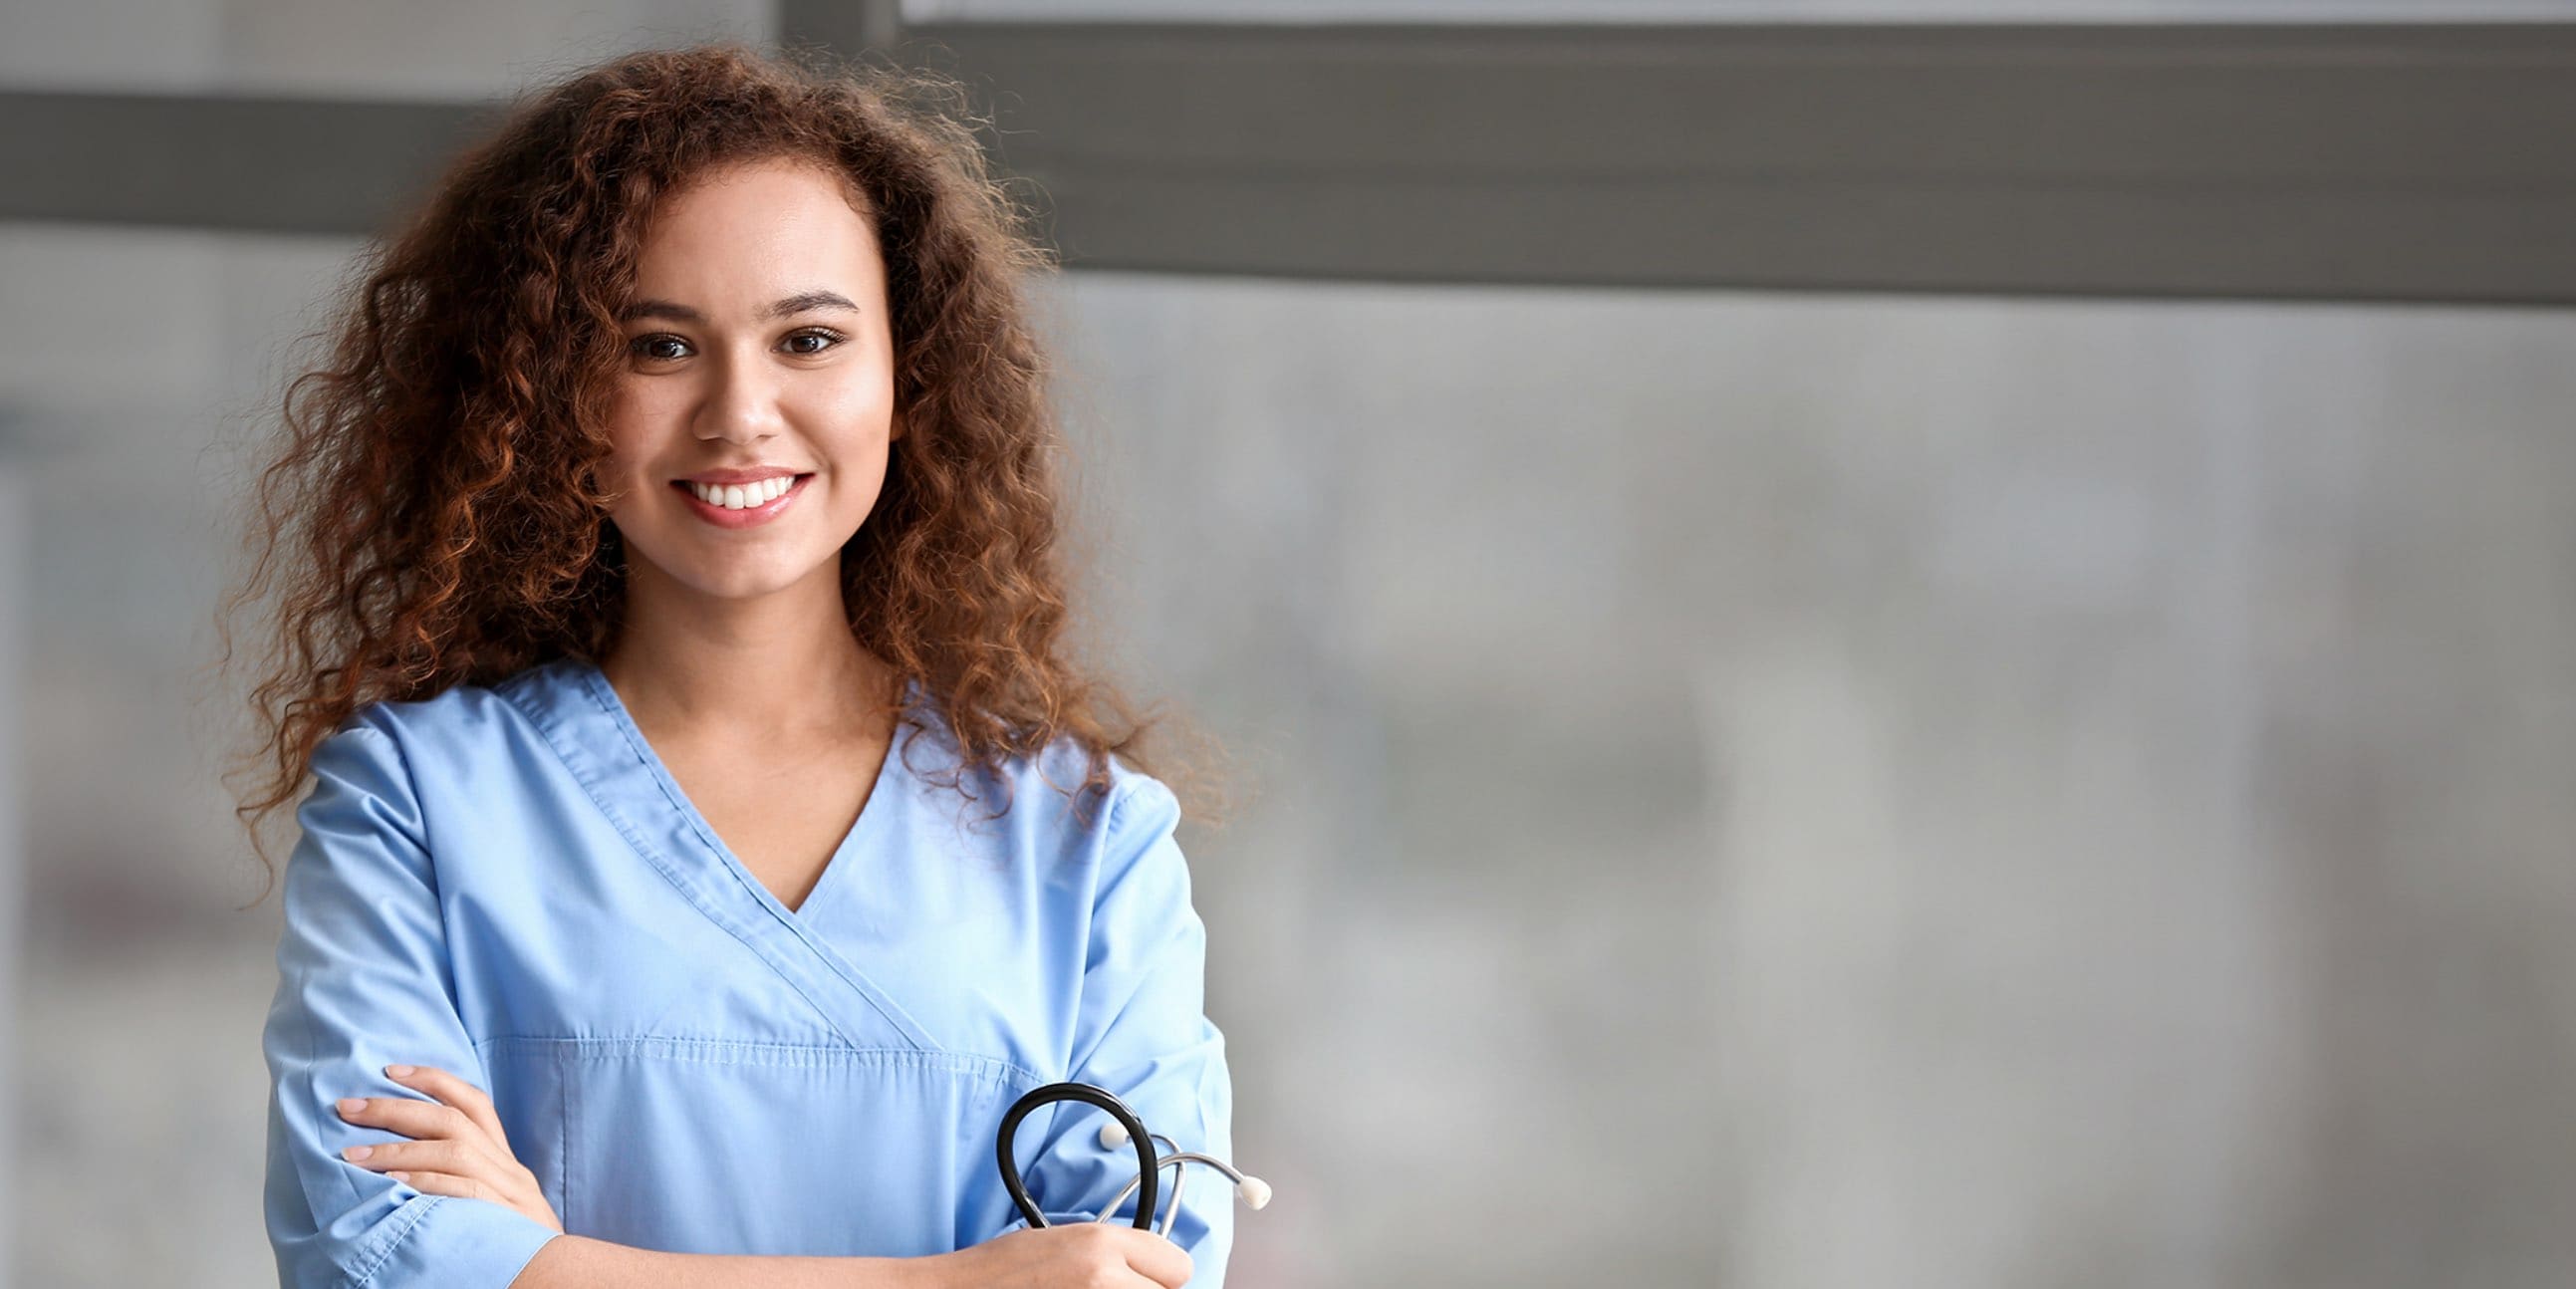 What to Expect from a Medical Assistant Course